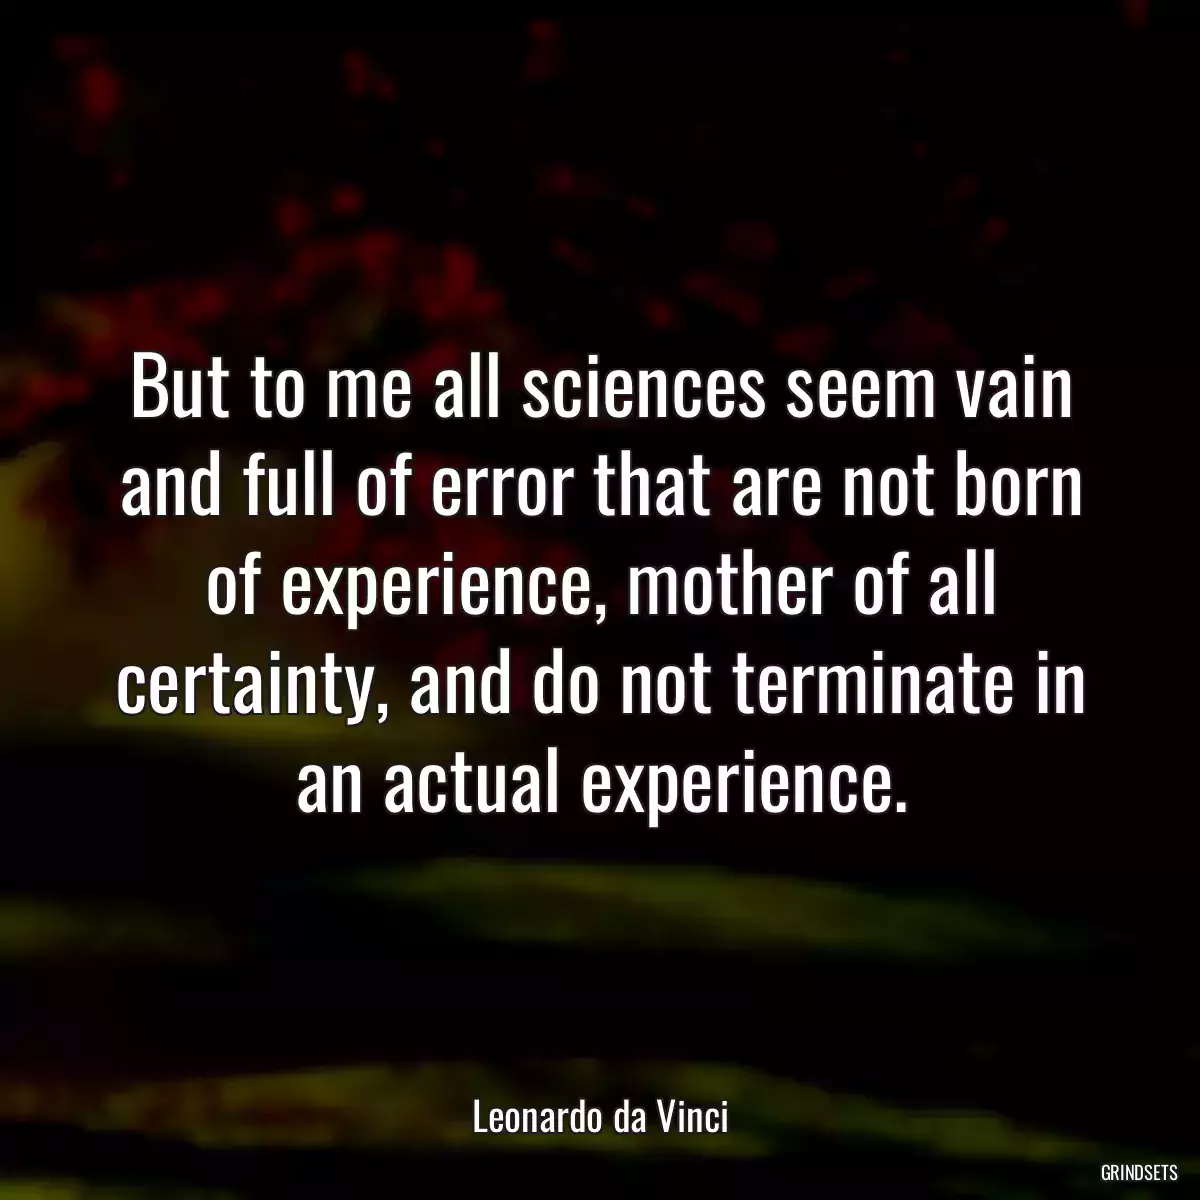 But to me all sciences seem vain and full of error that are not born of experience, mother of all certainty, and do not terminate in an actual experience.